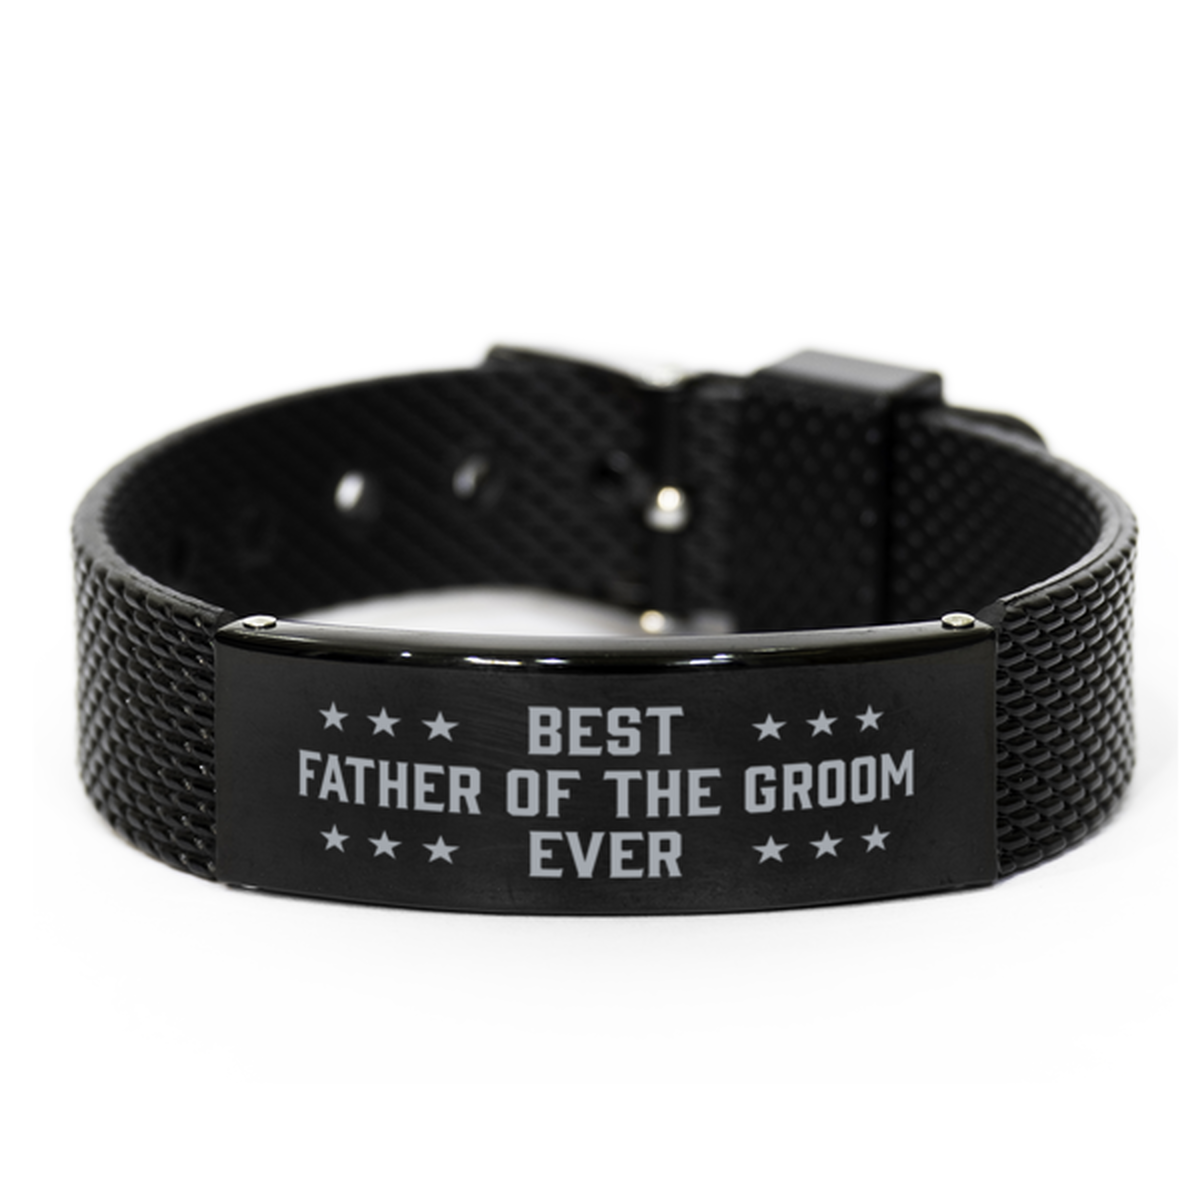 Best Father of the groom Ever Father of the groom Gifts, Gag Engraved Bracelet For Father of the groom, Best Family Gifts For Men